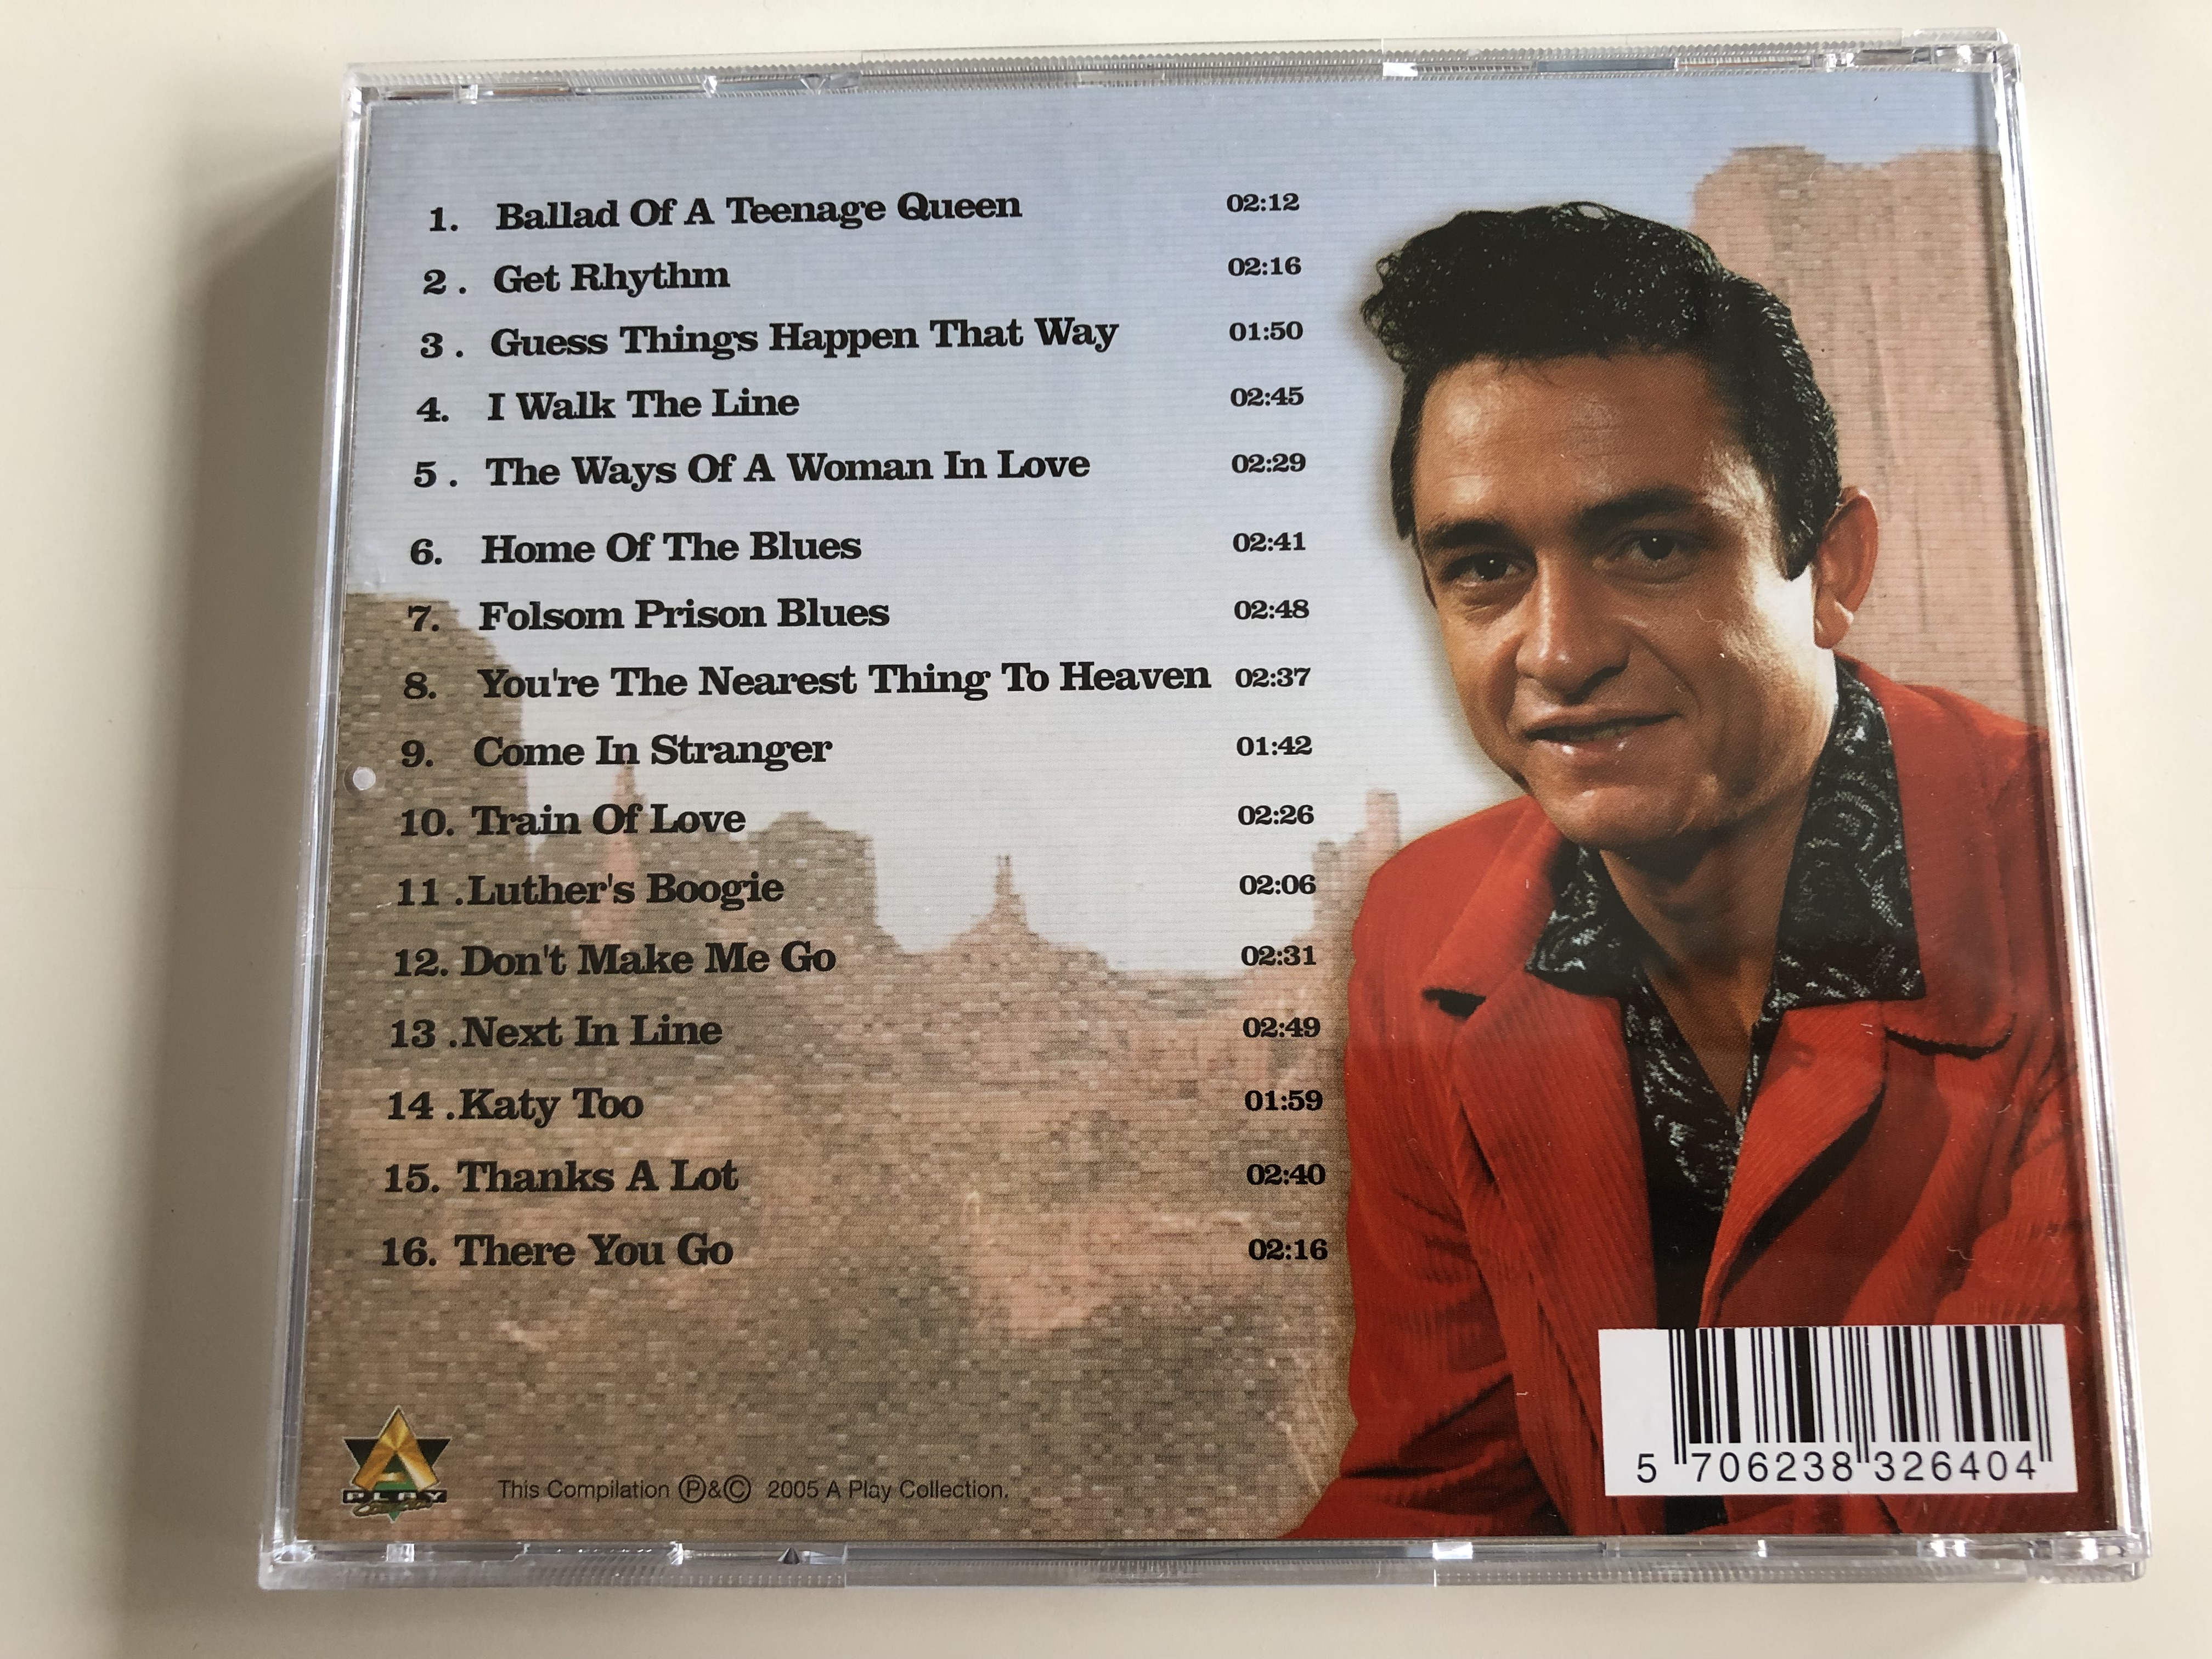 johnny-cash-and-the-tennessee-two-16-greatest-hits-ballad-of-a-teenage-queen-i-walk-the-line-folsom-prison-blues-luther-s-boogie-audio-cd-2005-10575-2-4-.jpg